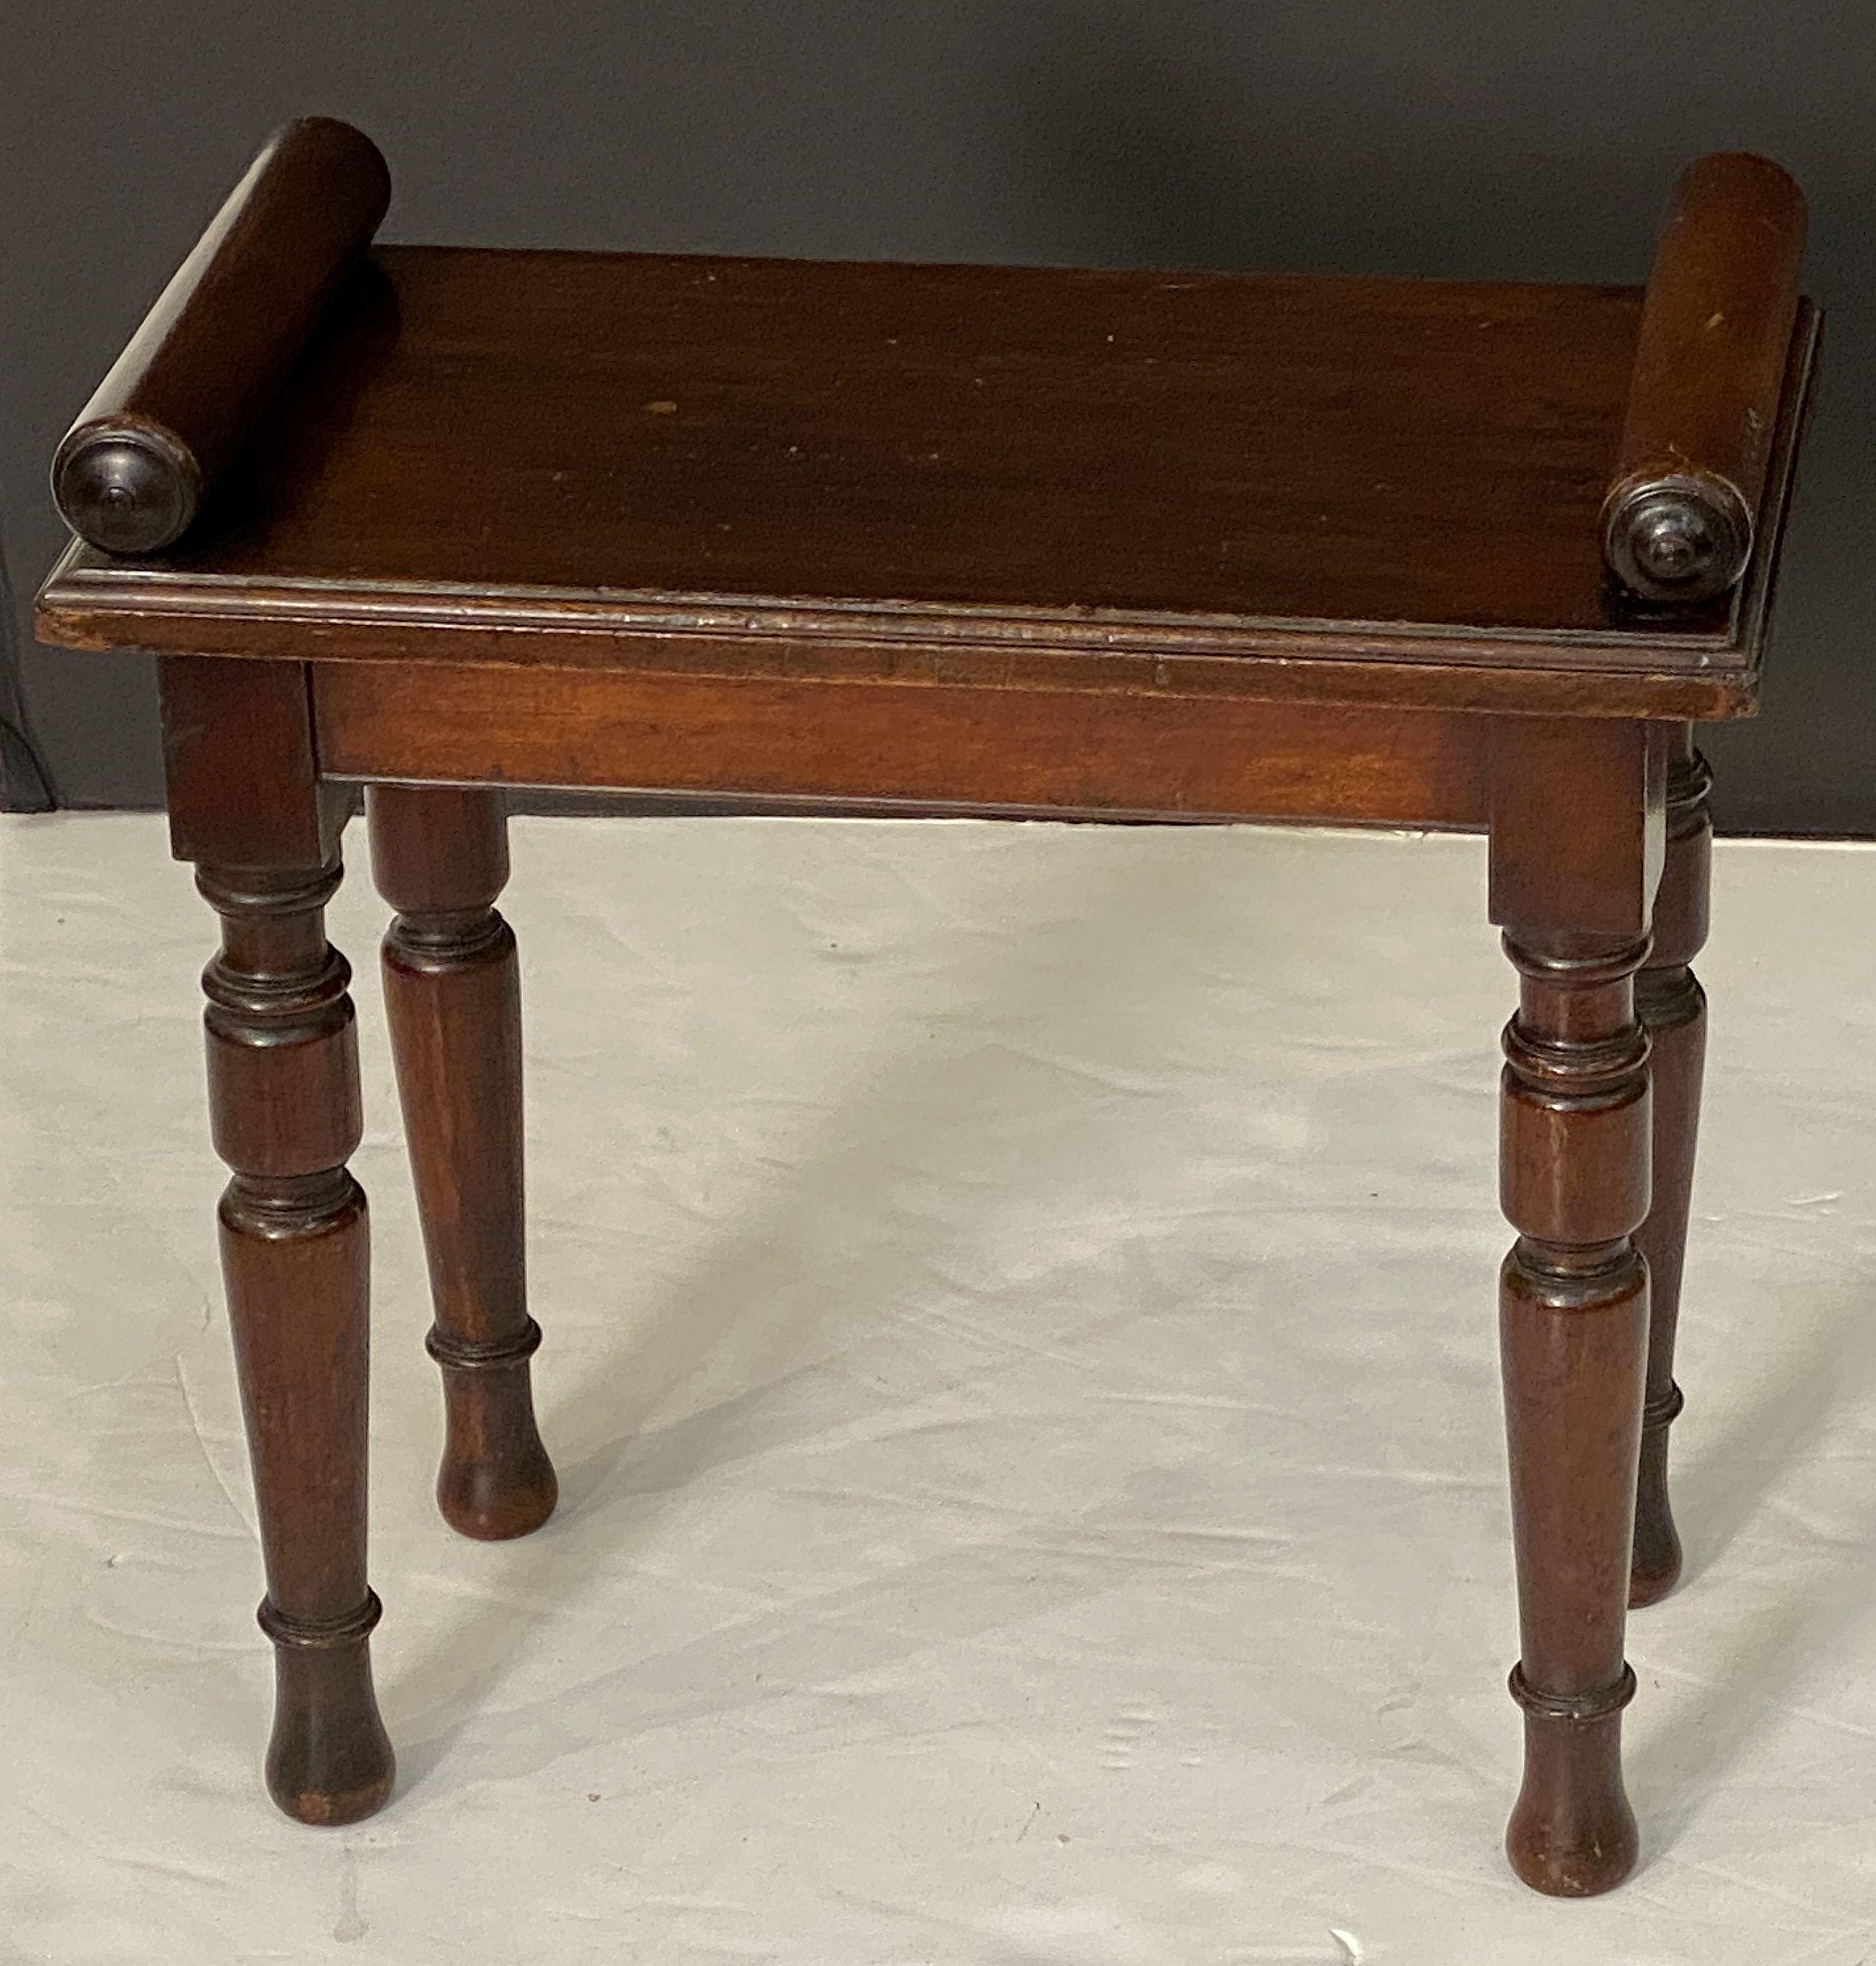 A fine English hall bench or window seat (stool) of mahogany from the Edwardian era, featuring turned handles at opposing ends over a long plank seat and set upon four turned legs.

Dimensions:

H 19 5/8 inches
W 20 inches
D 11 inches

Seat